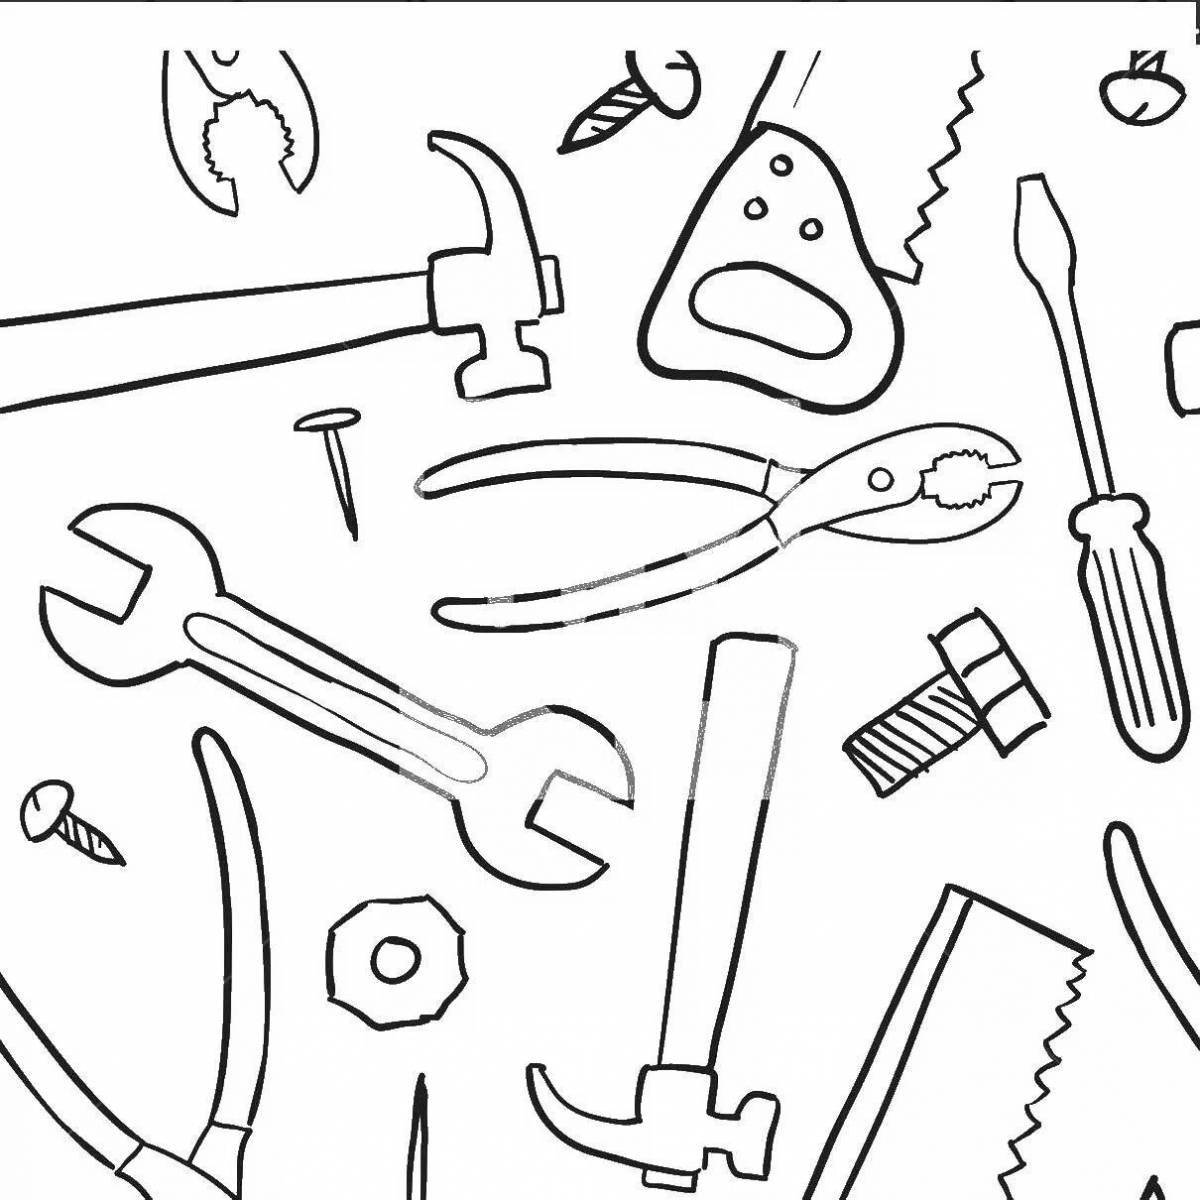 Colorful tools coloring page